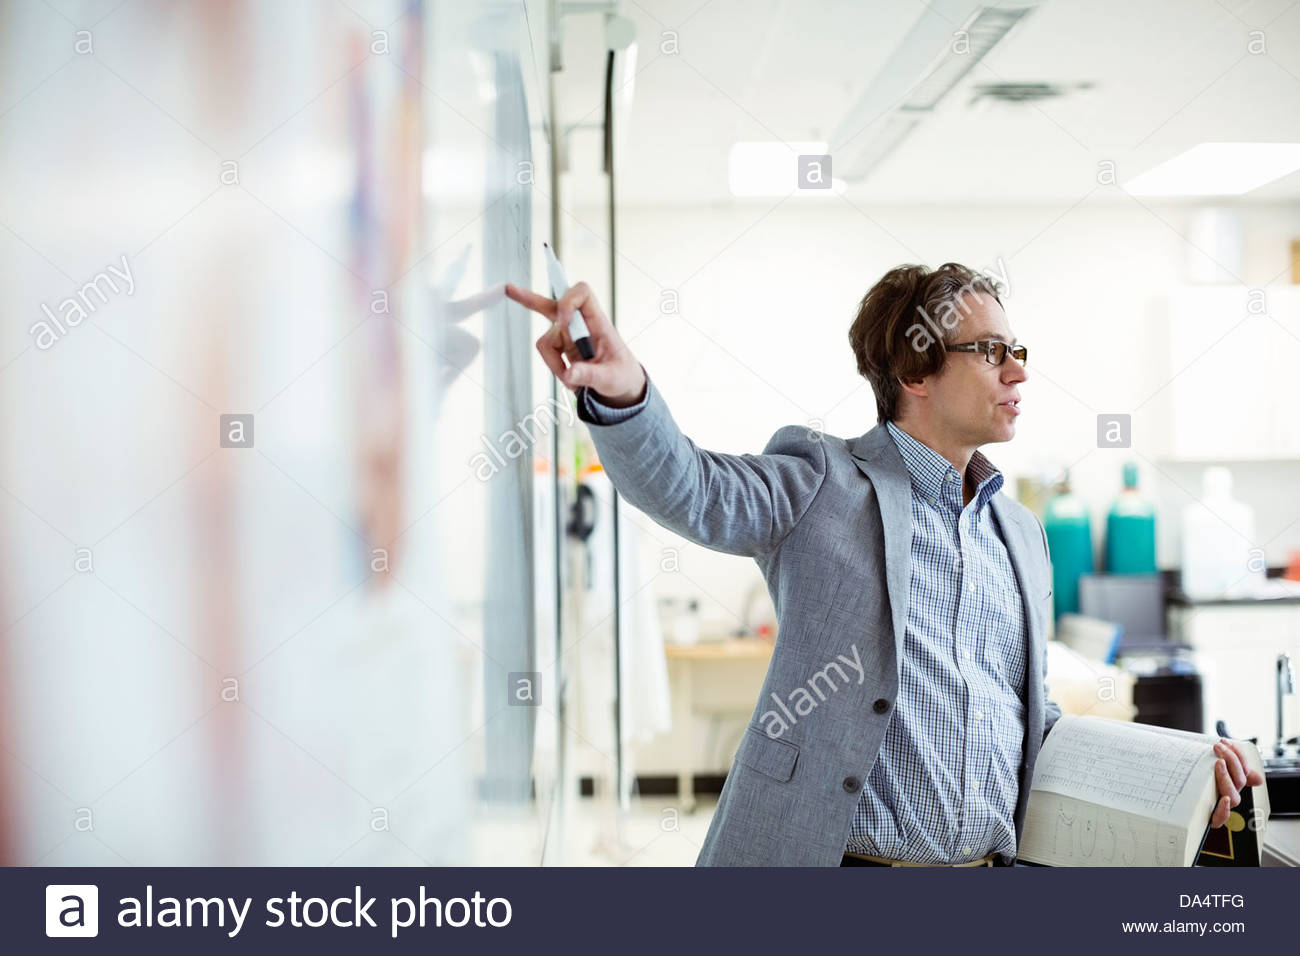 Male professor teaching in college science lab Stock Photo